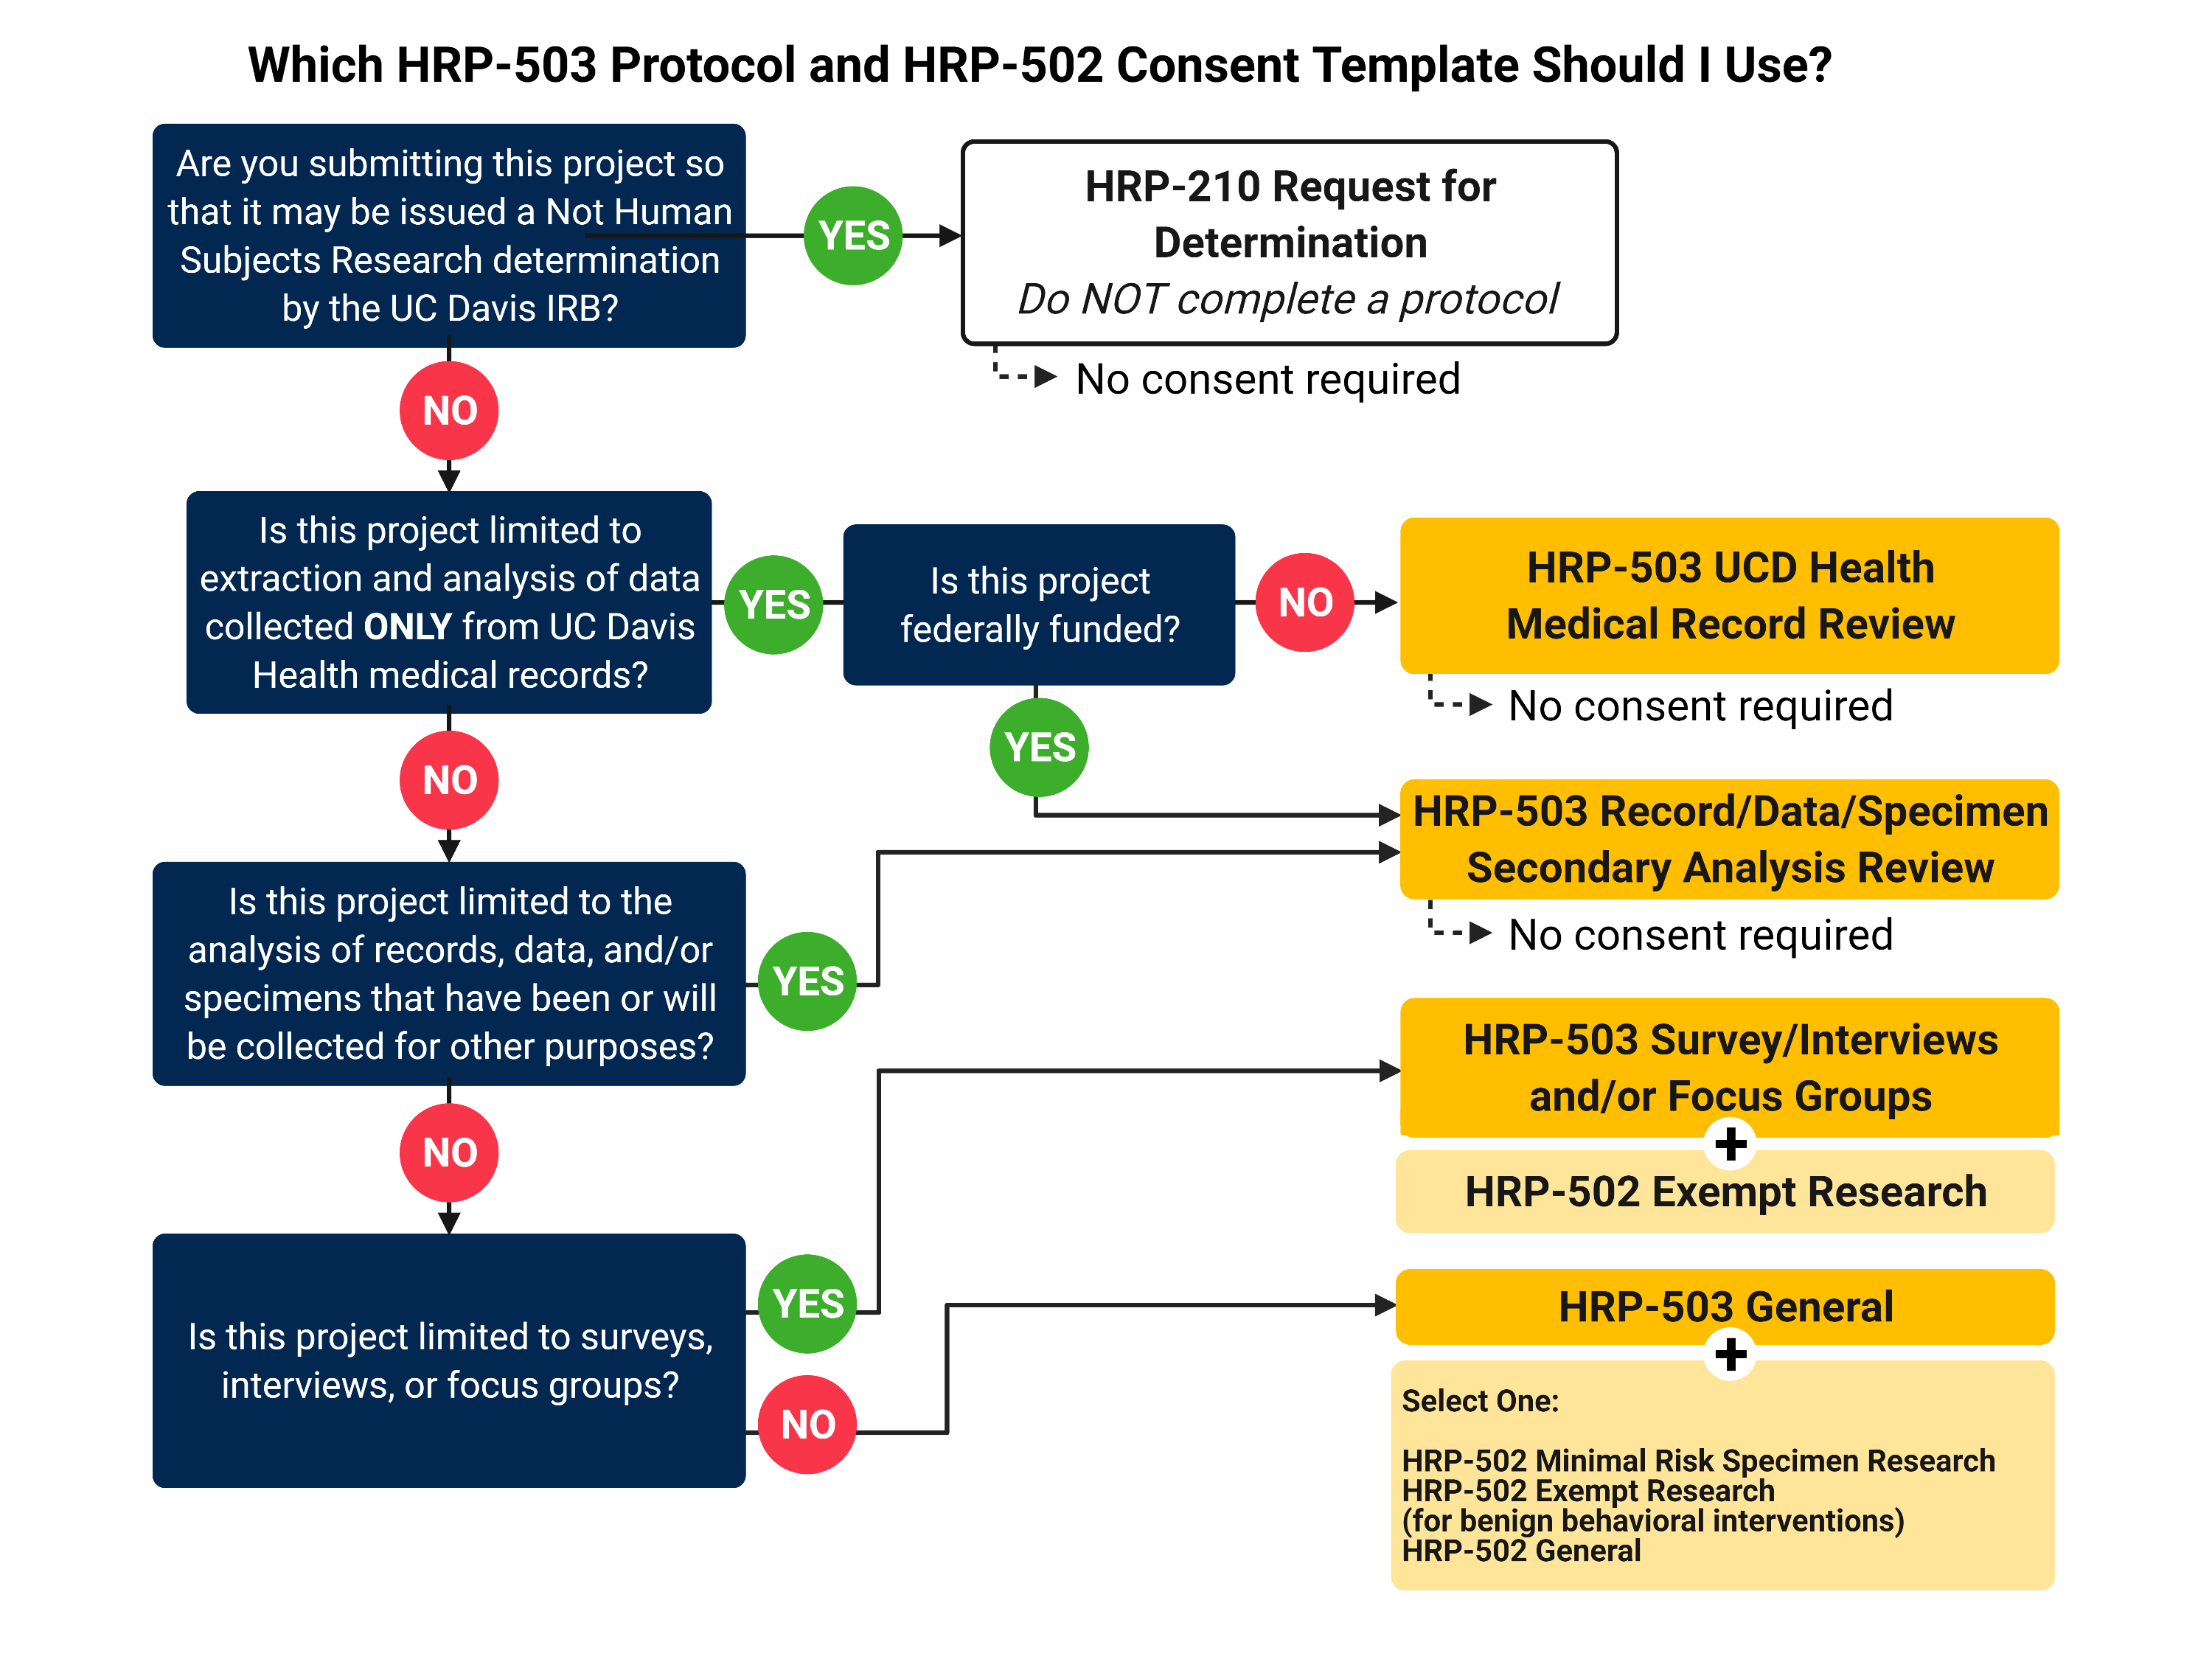 Protocol and consent template decision tree